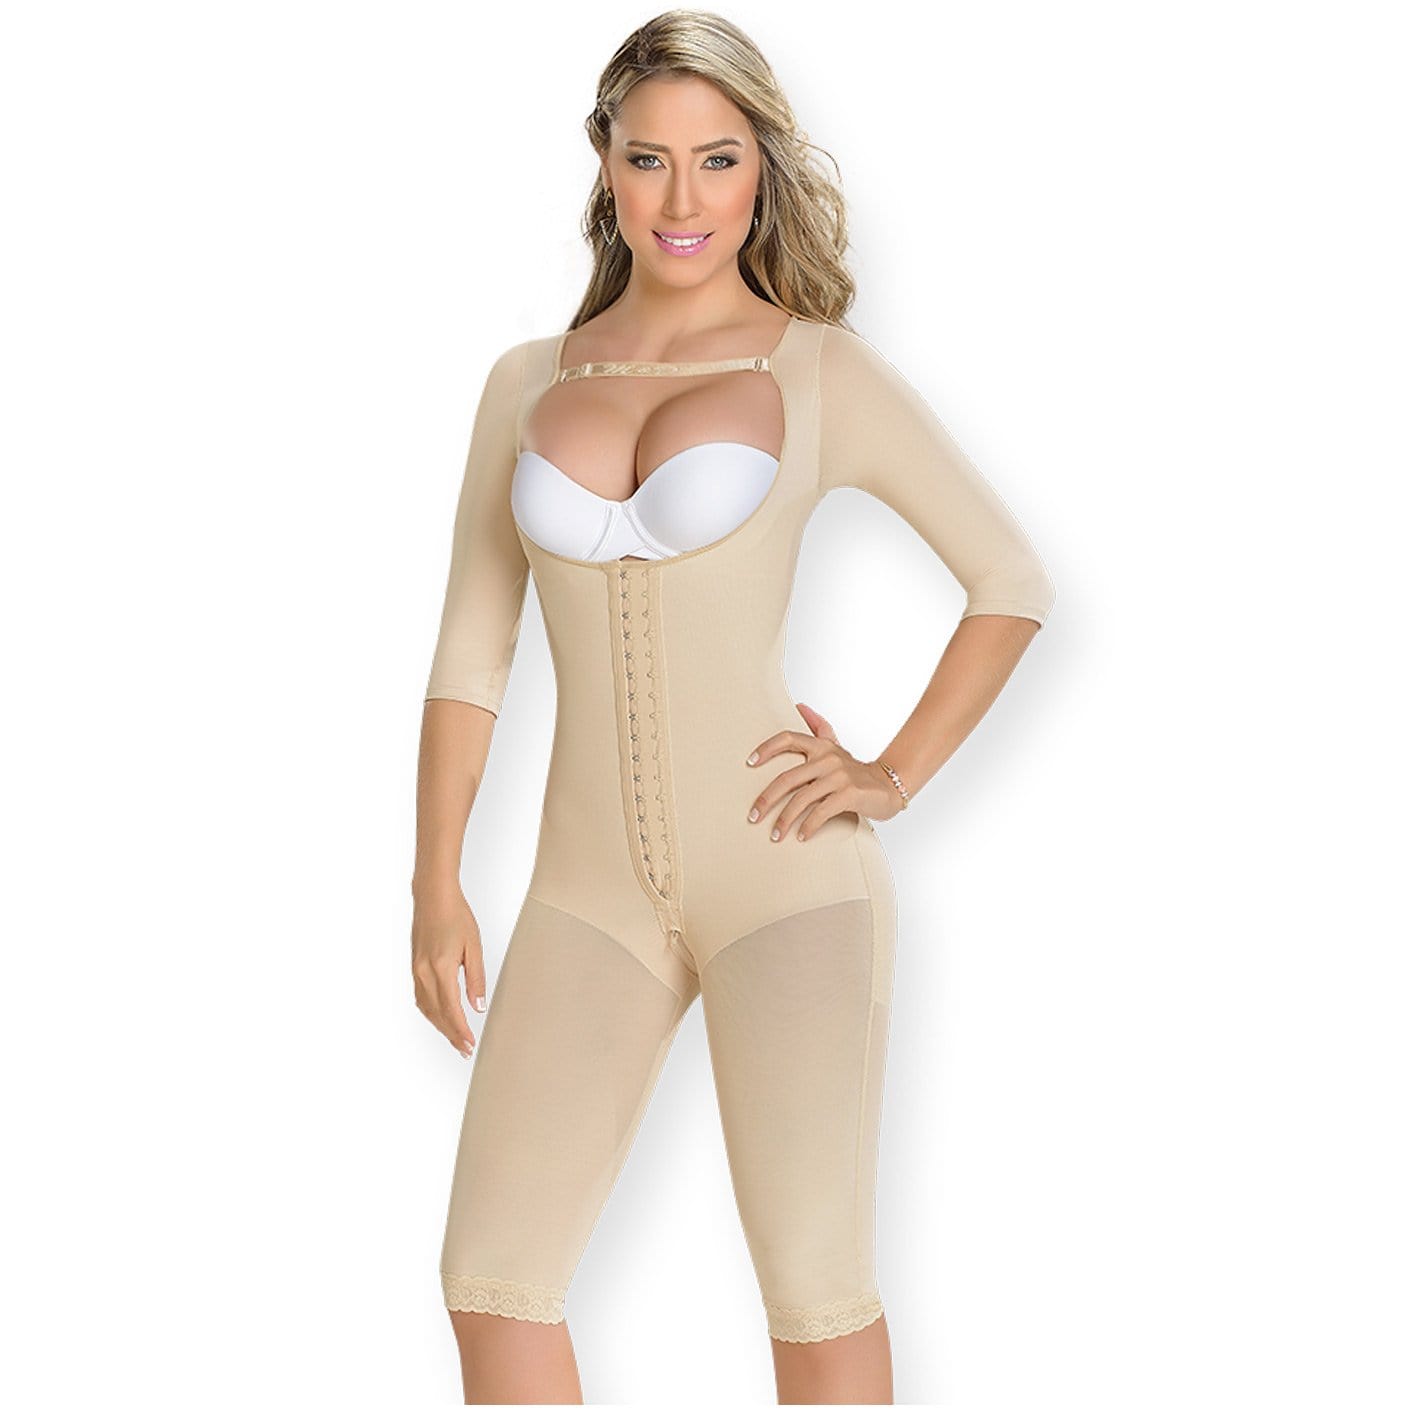 Fajas MyD Full Body Shaper Tummy Control with Sleeves full body front view.